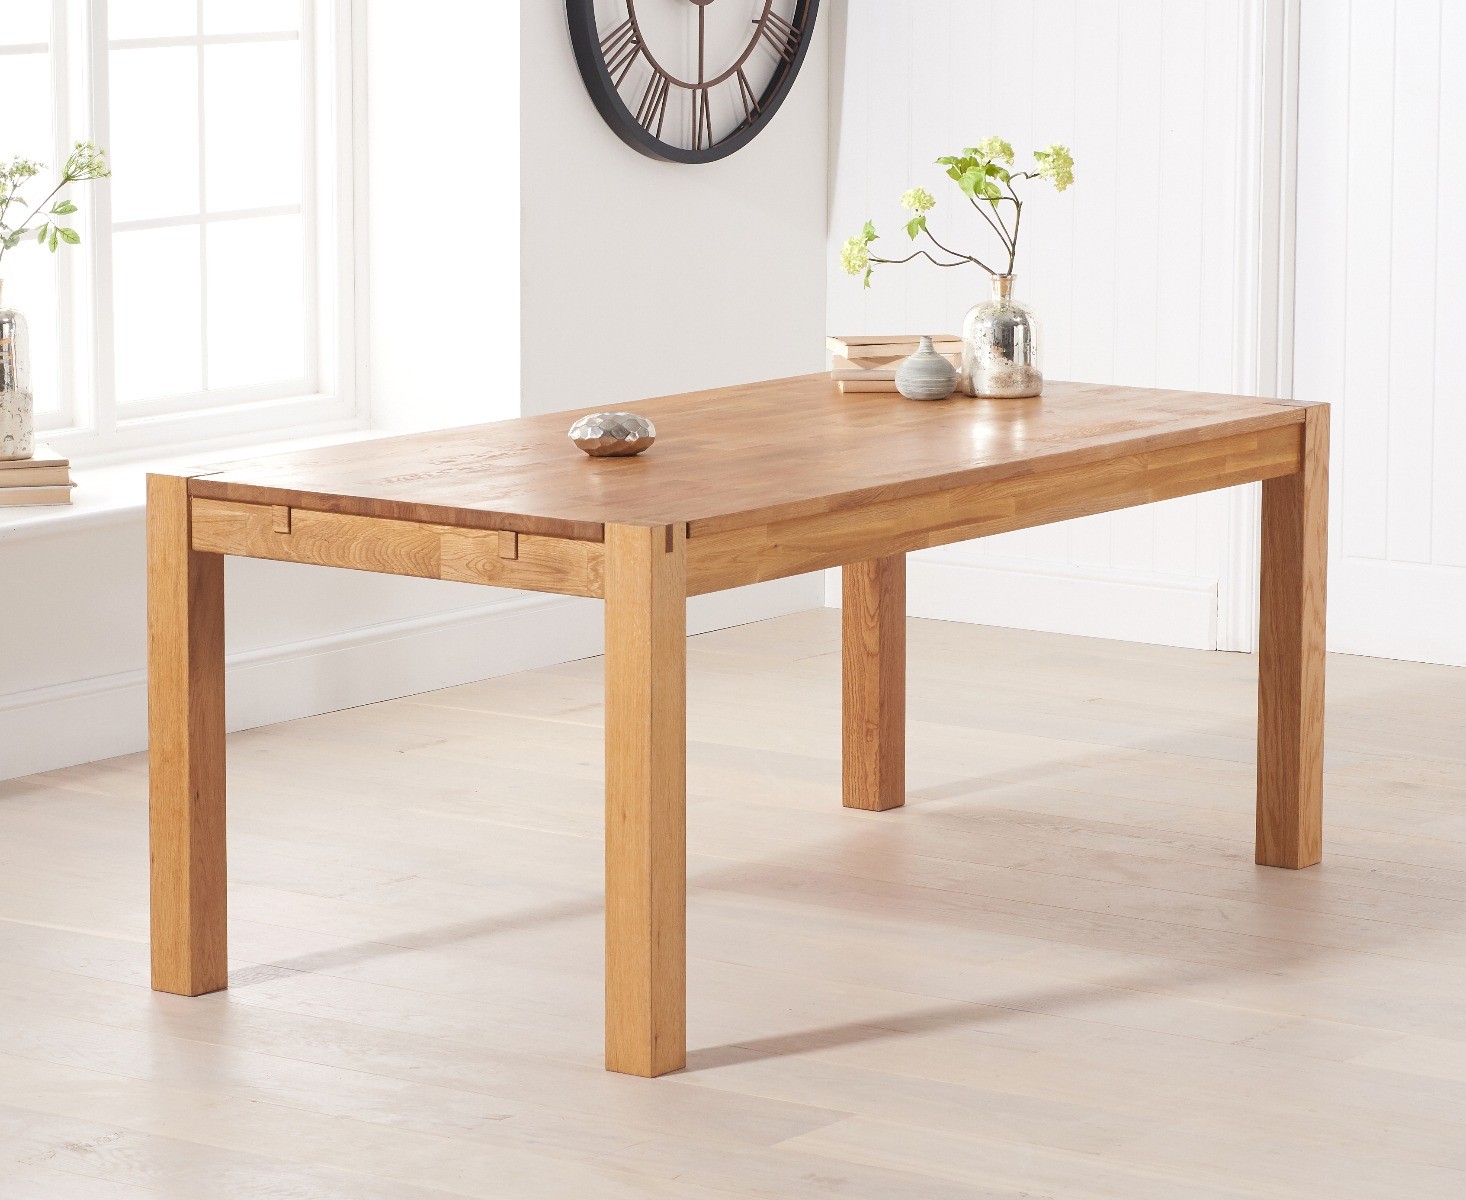 Photo 1 of Thetford 180cm oak table with larson brown faux leather benches